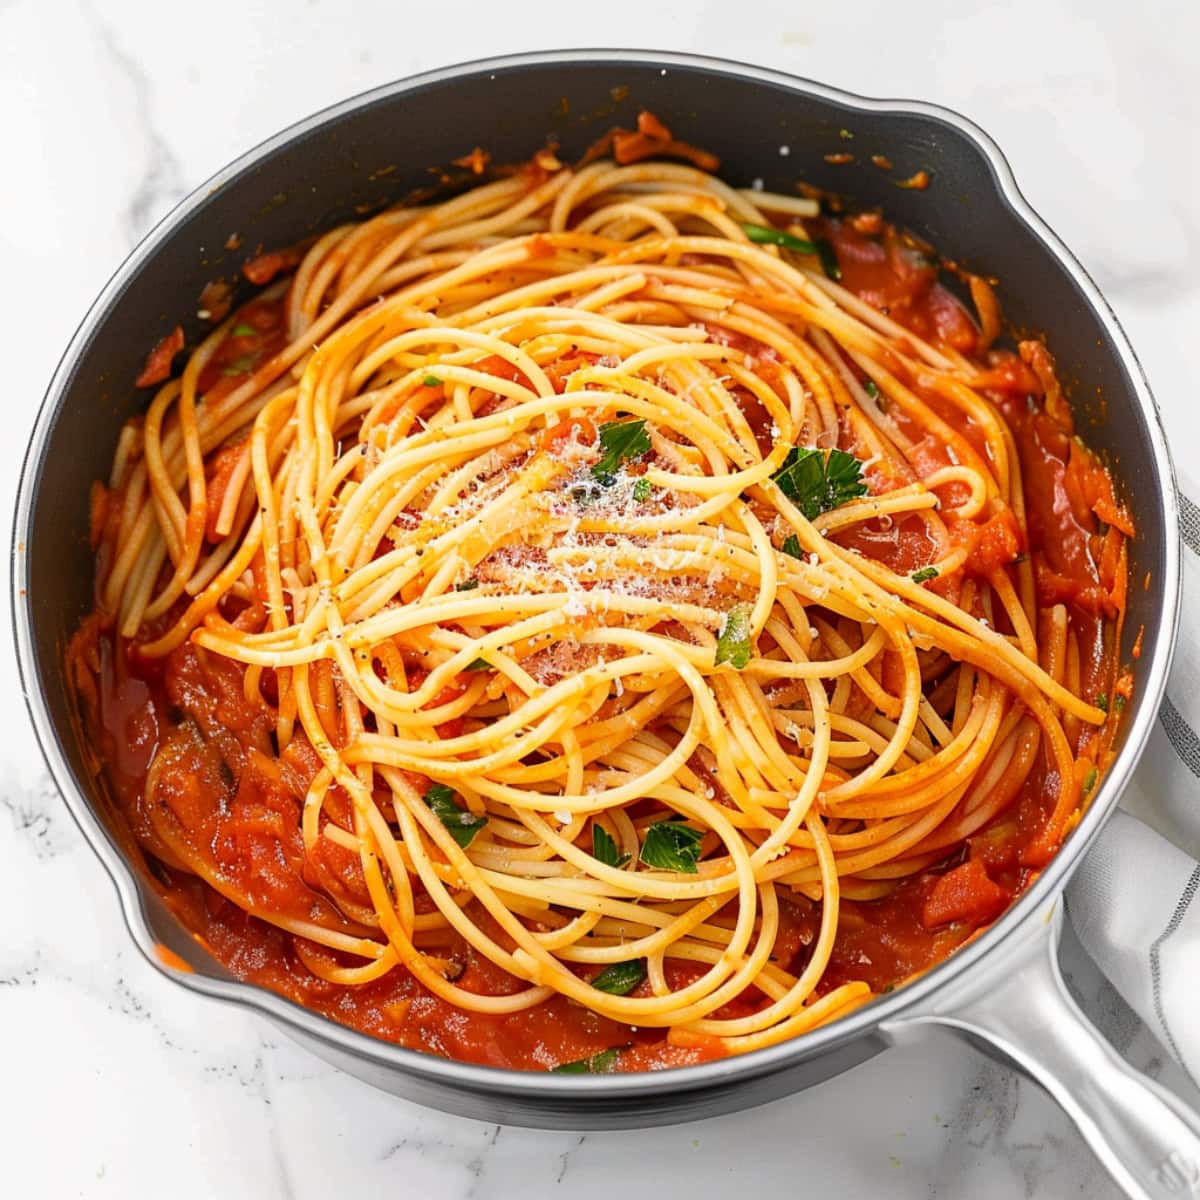 Spaghetti with tomato sauce in a skillet on a white marble table.